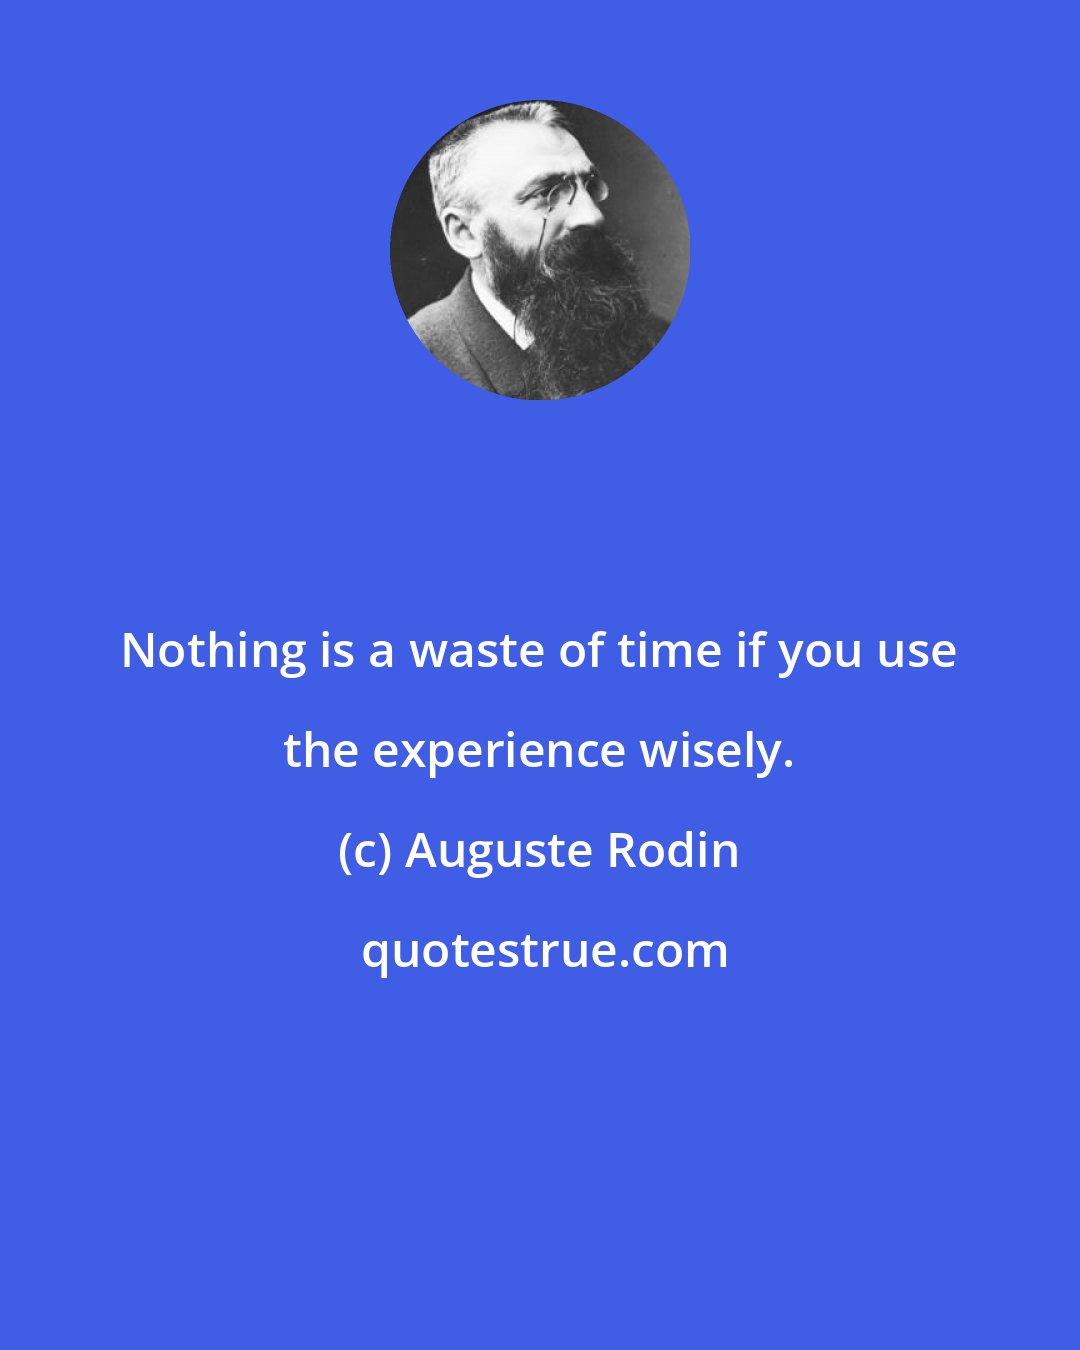 Auguste Rodin: Nothing is a waste of time if you use the experience wisely.